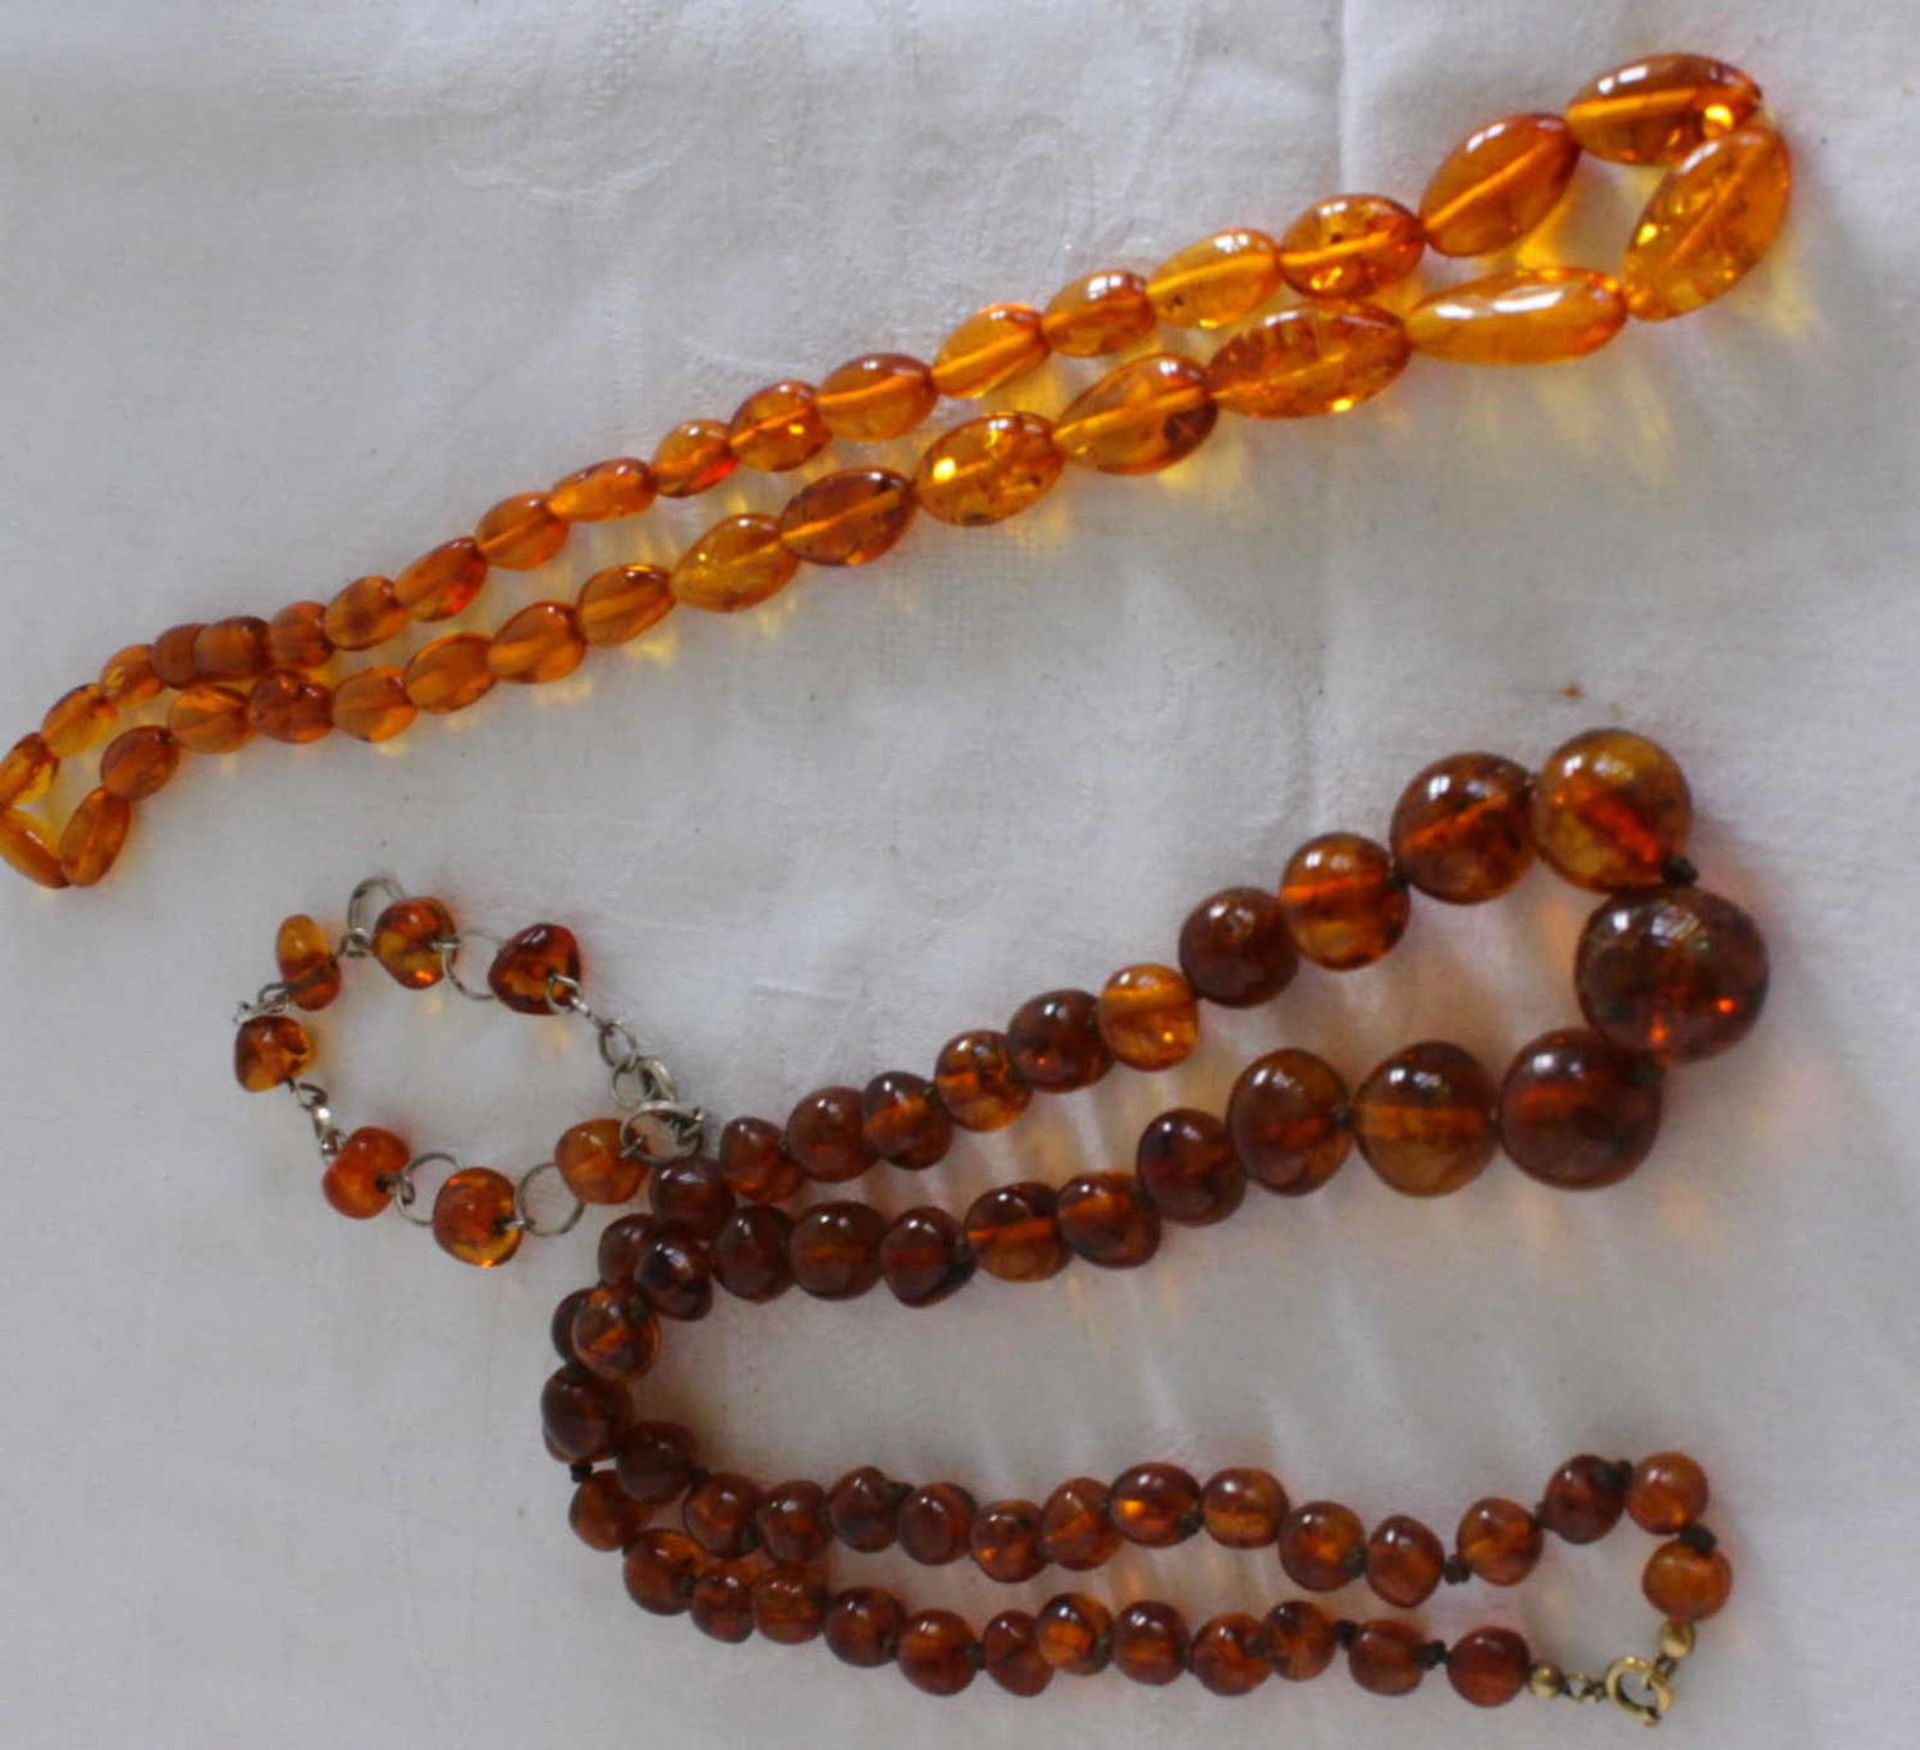 2 amber necklaces and 1 amber bracelet. Different models.